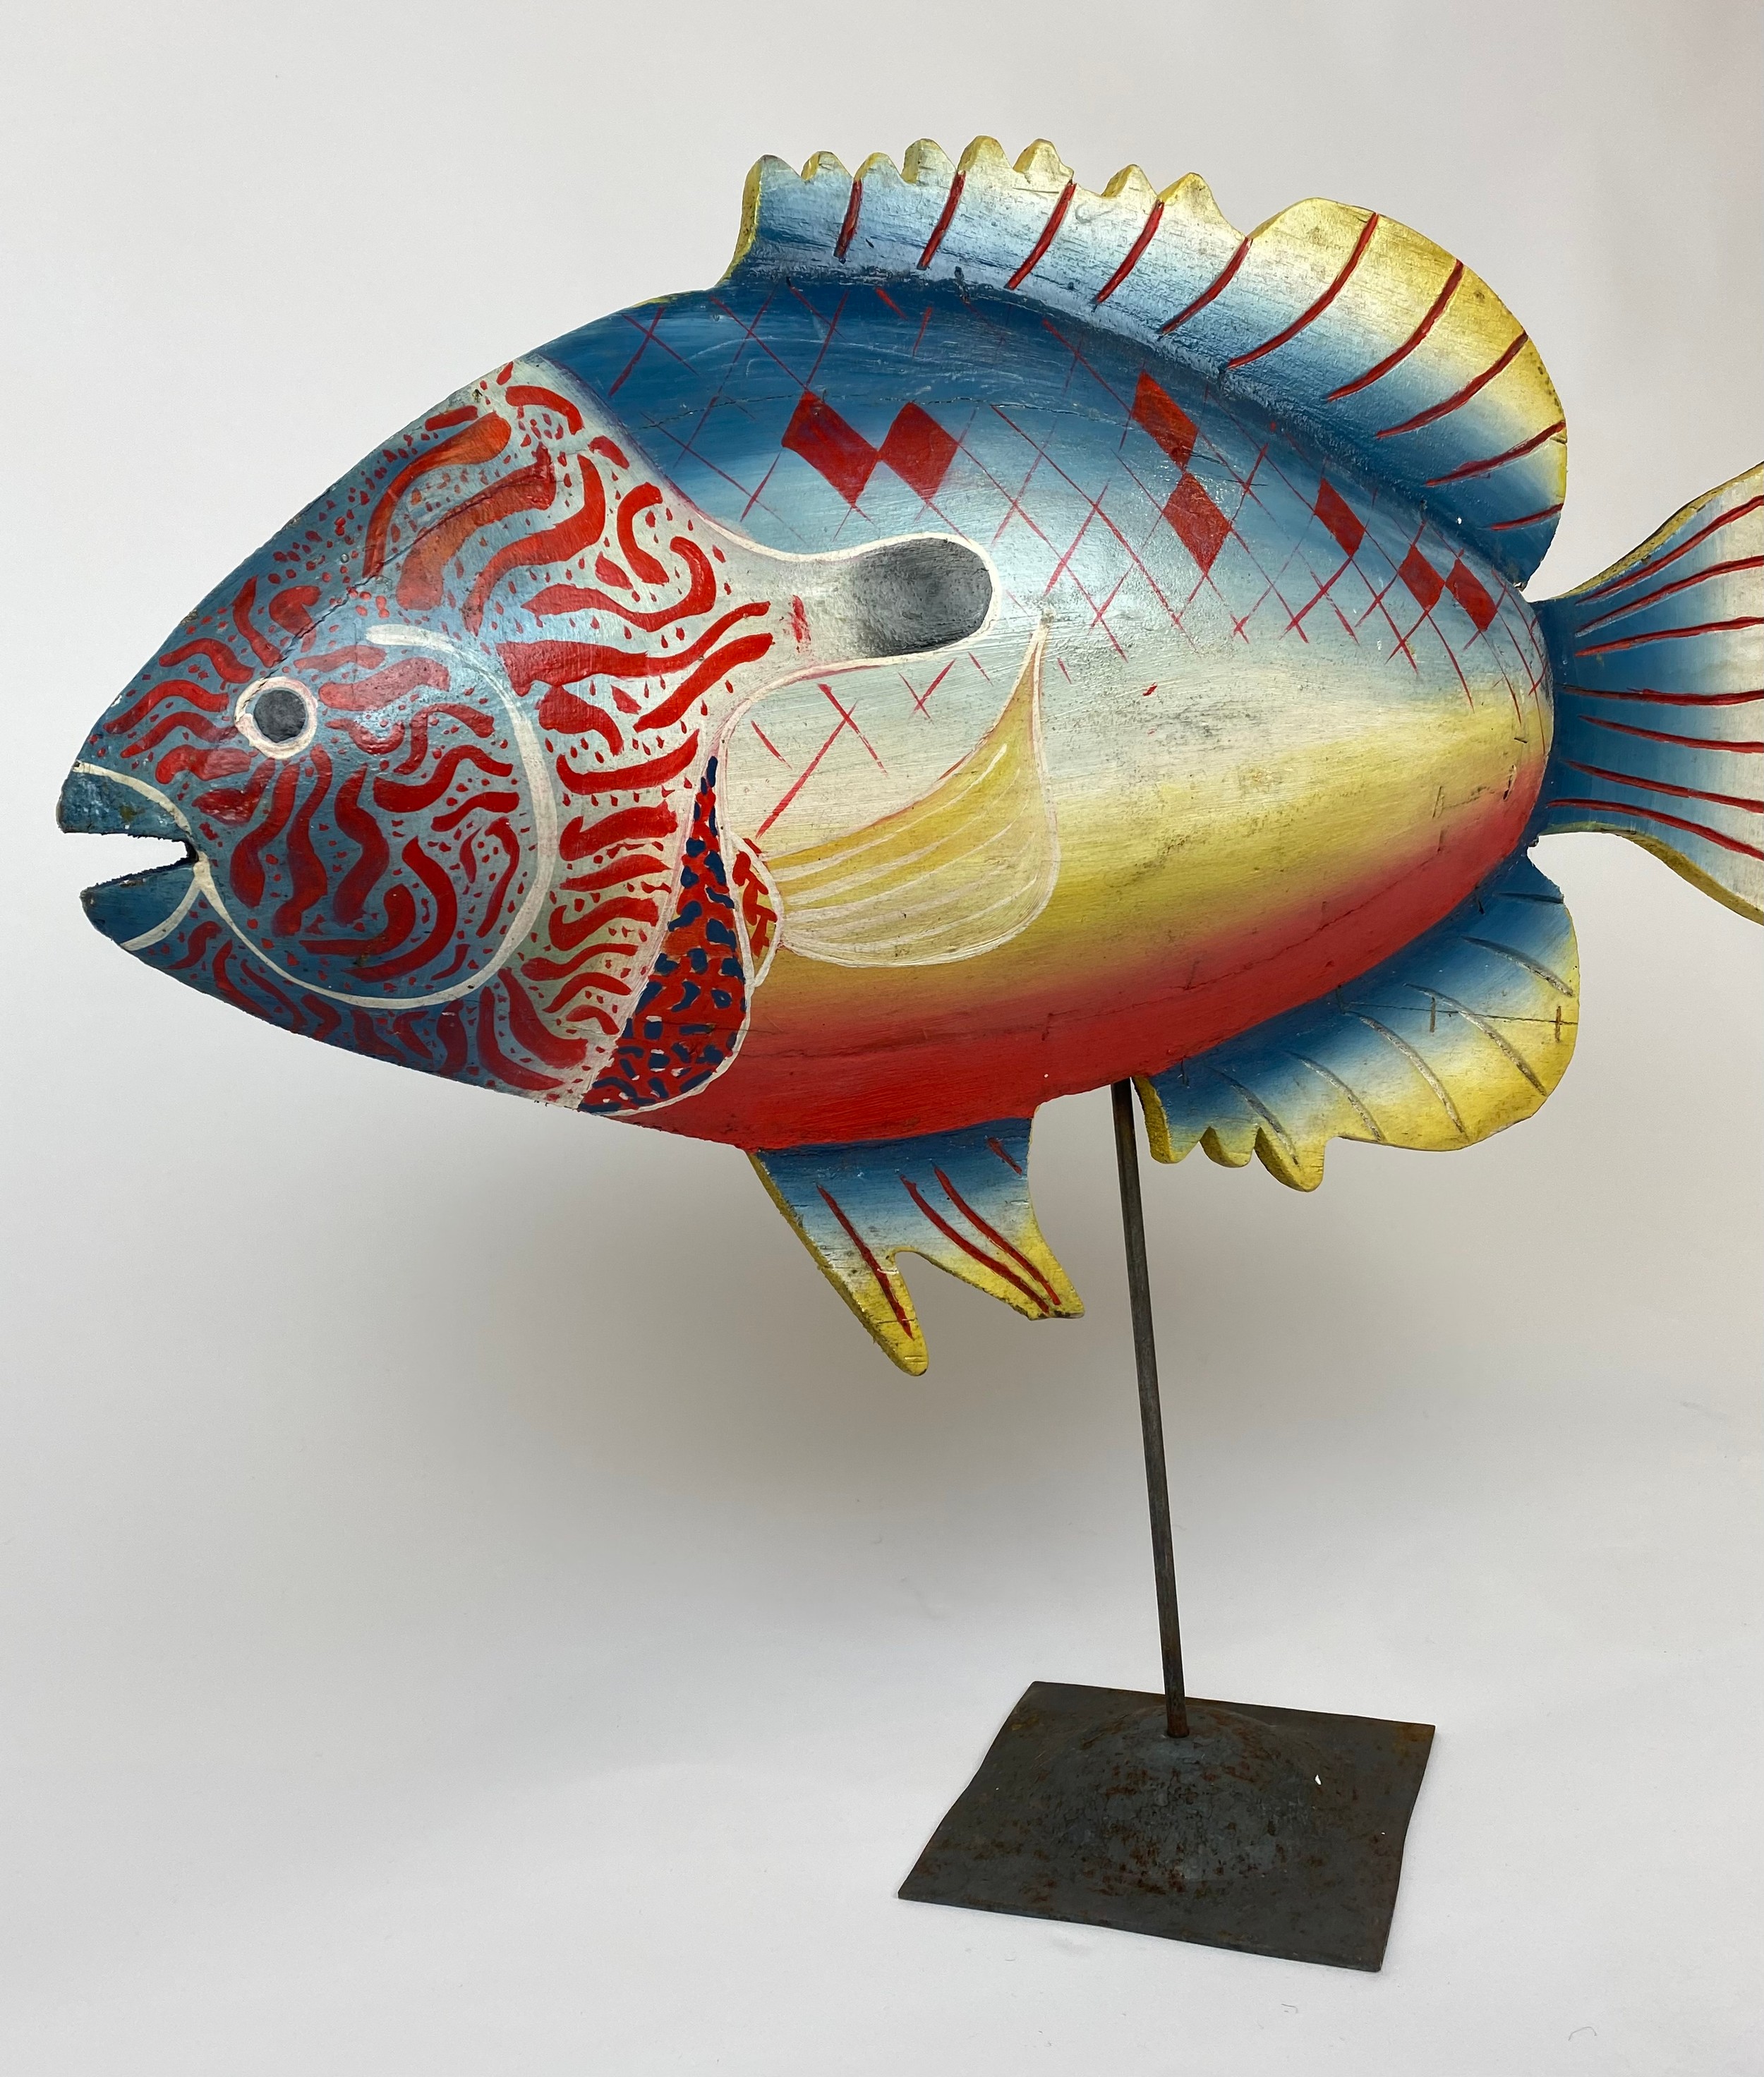 PARROT FISH ON STAND, carved and painted wood on metal stand, 60cm x 50cm H. - Image 2 of 2